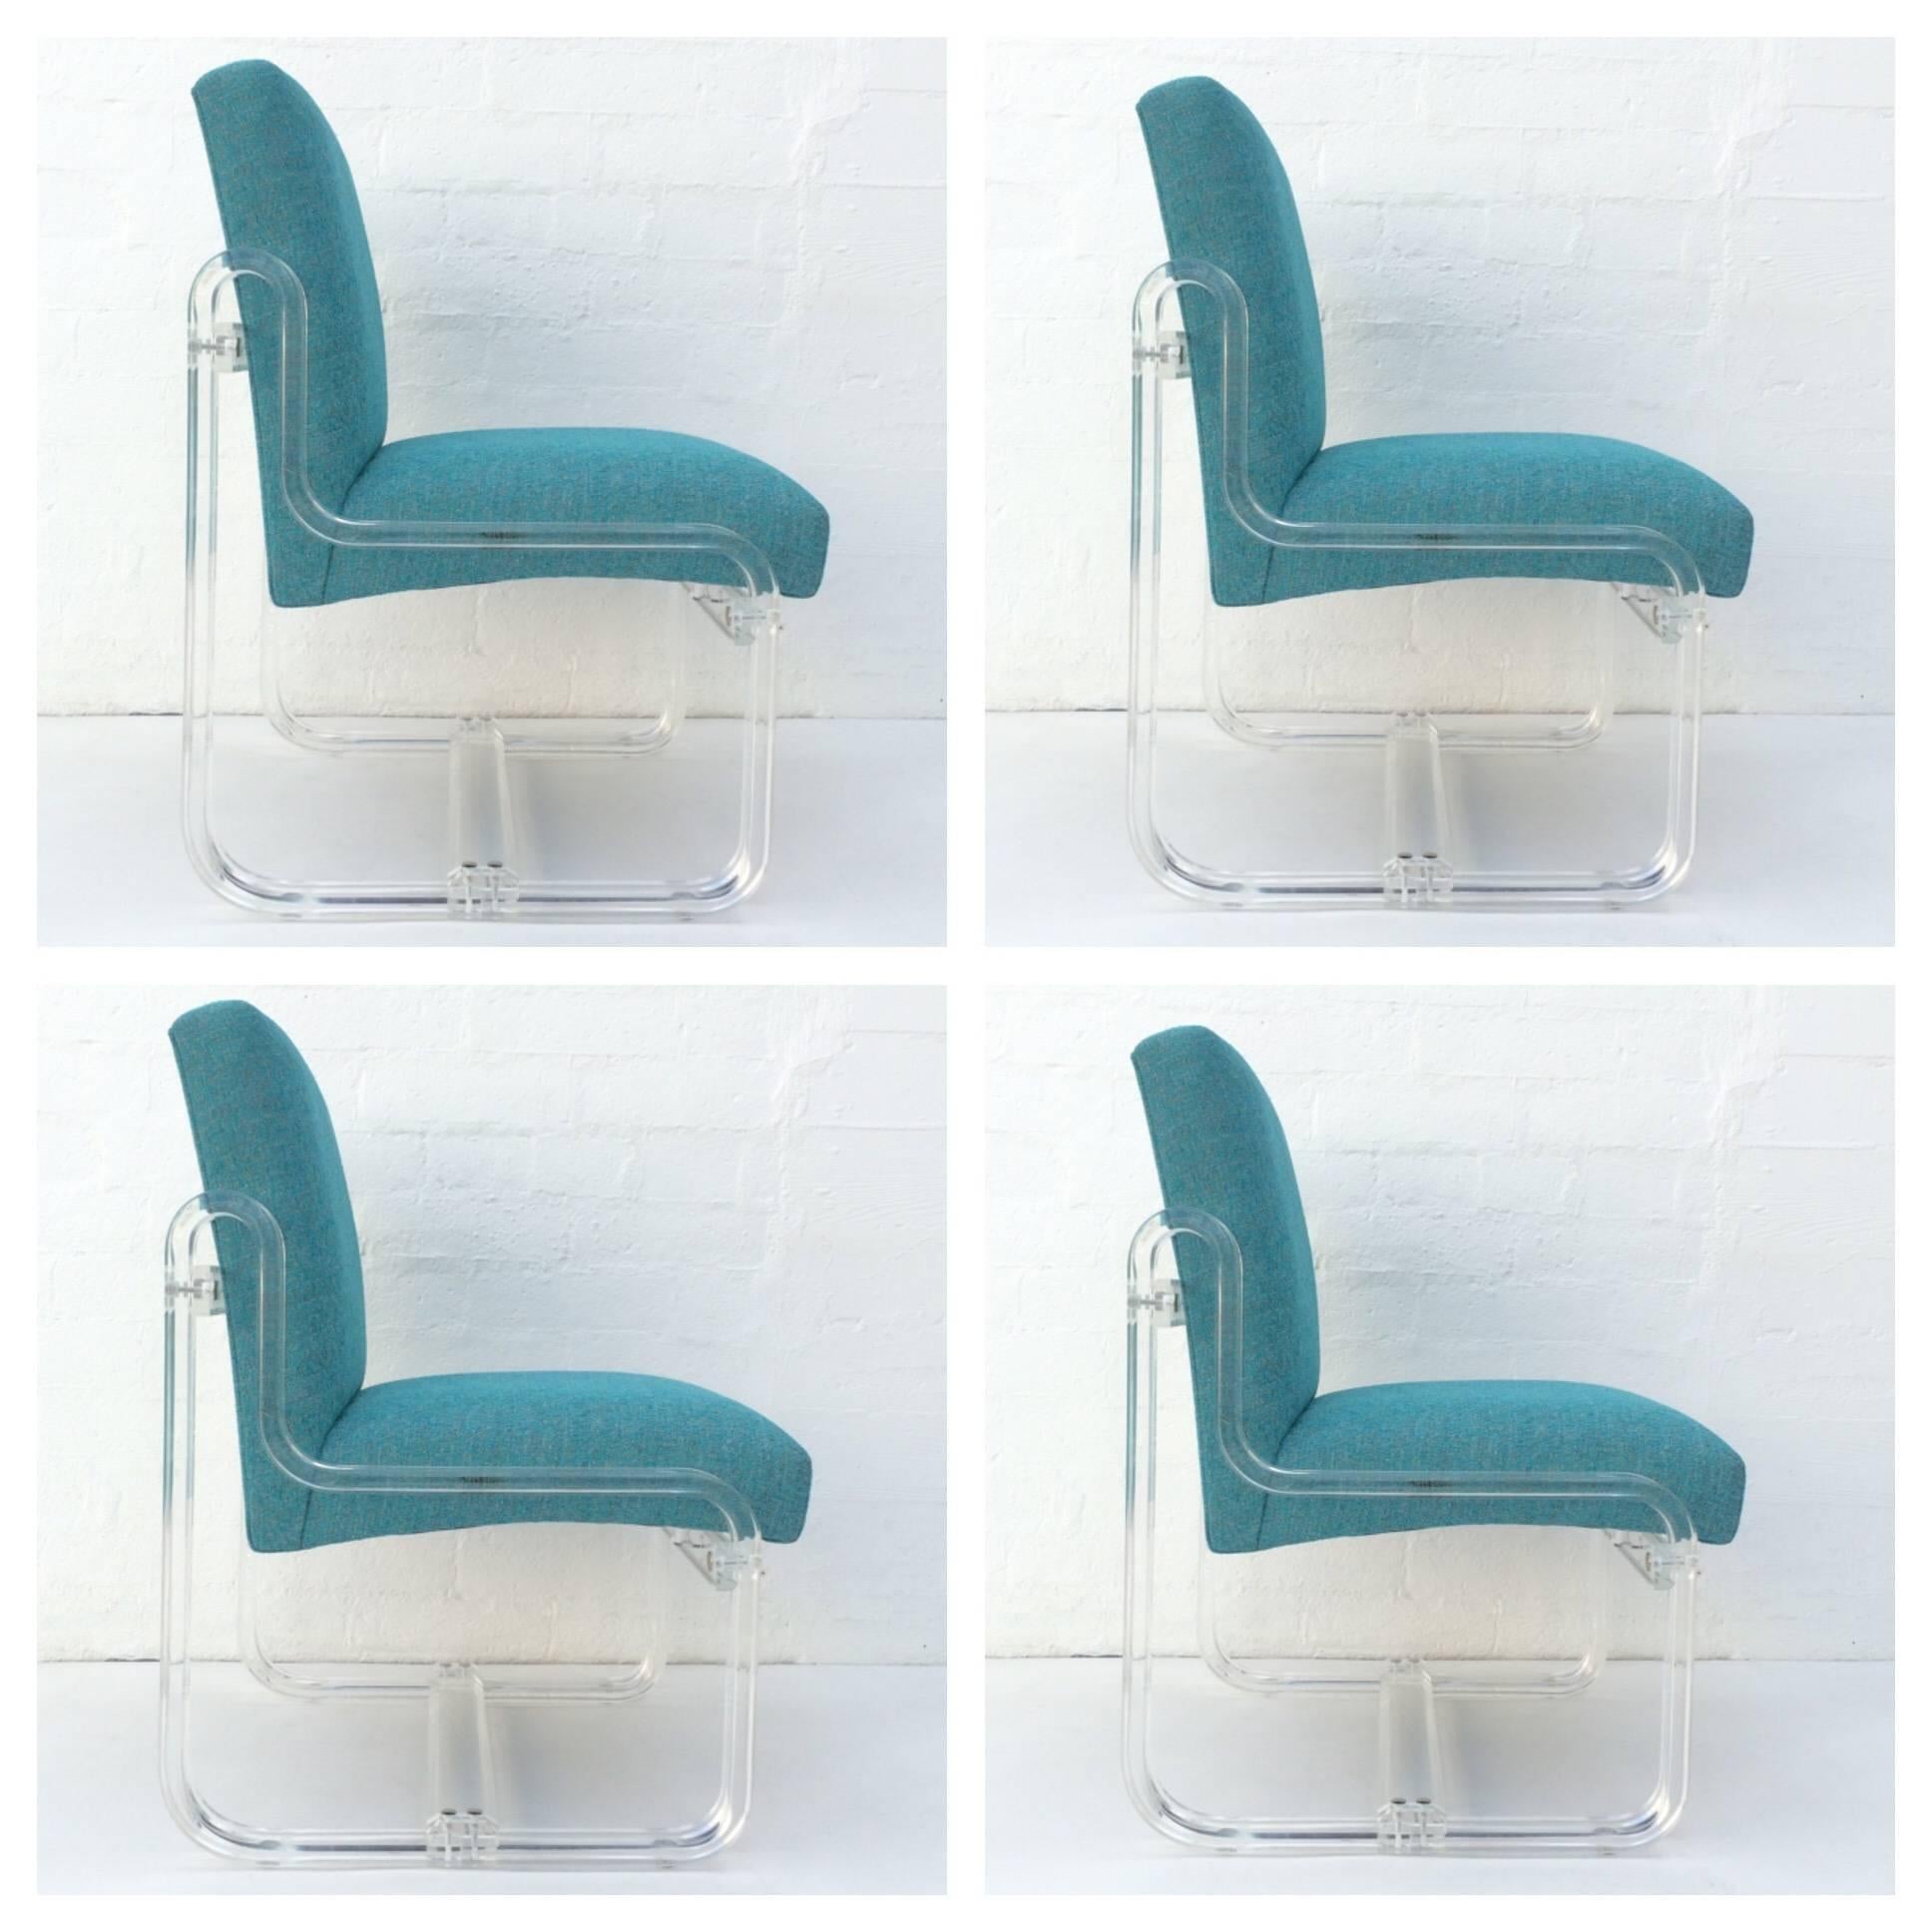 Set of four newly reupholstered in an aqua blue fabric with slight gray tones acrylic dining chairs.
The acrylic has been professionally polished.
Made by Vivid of Los Angeles, circa 1980s.